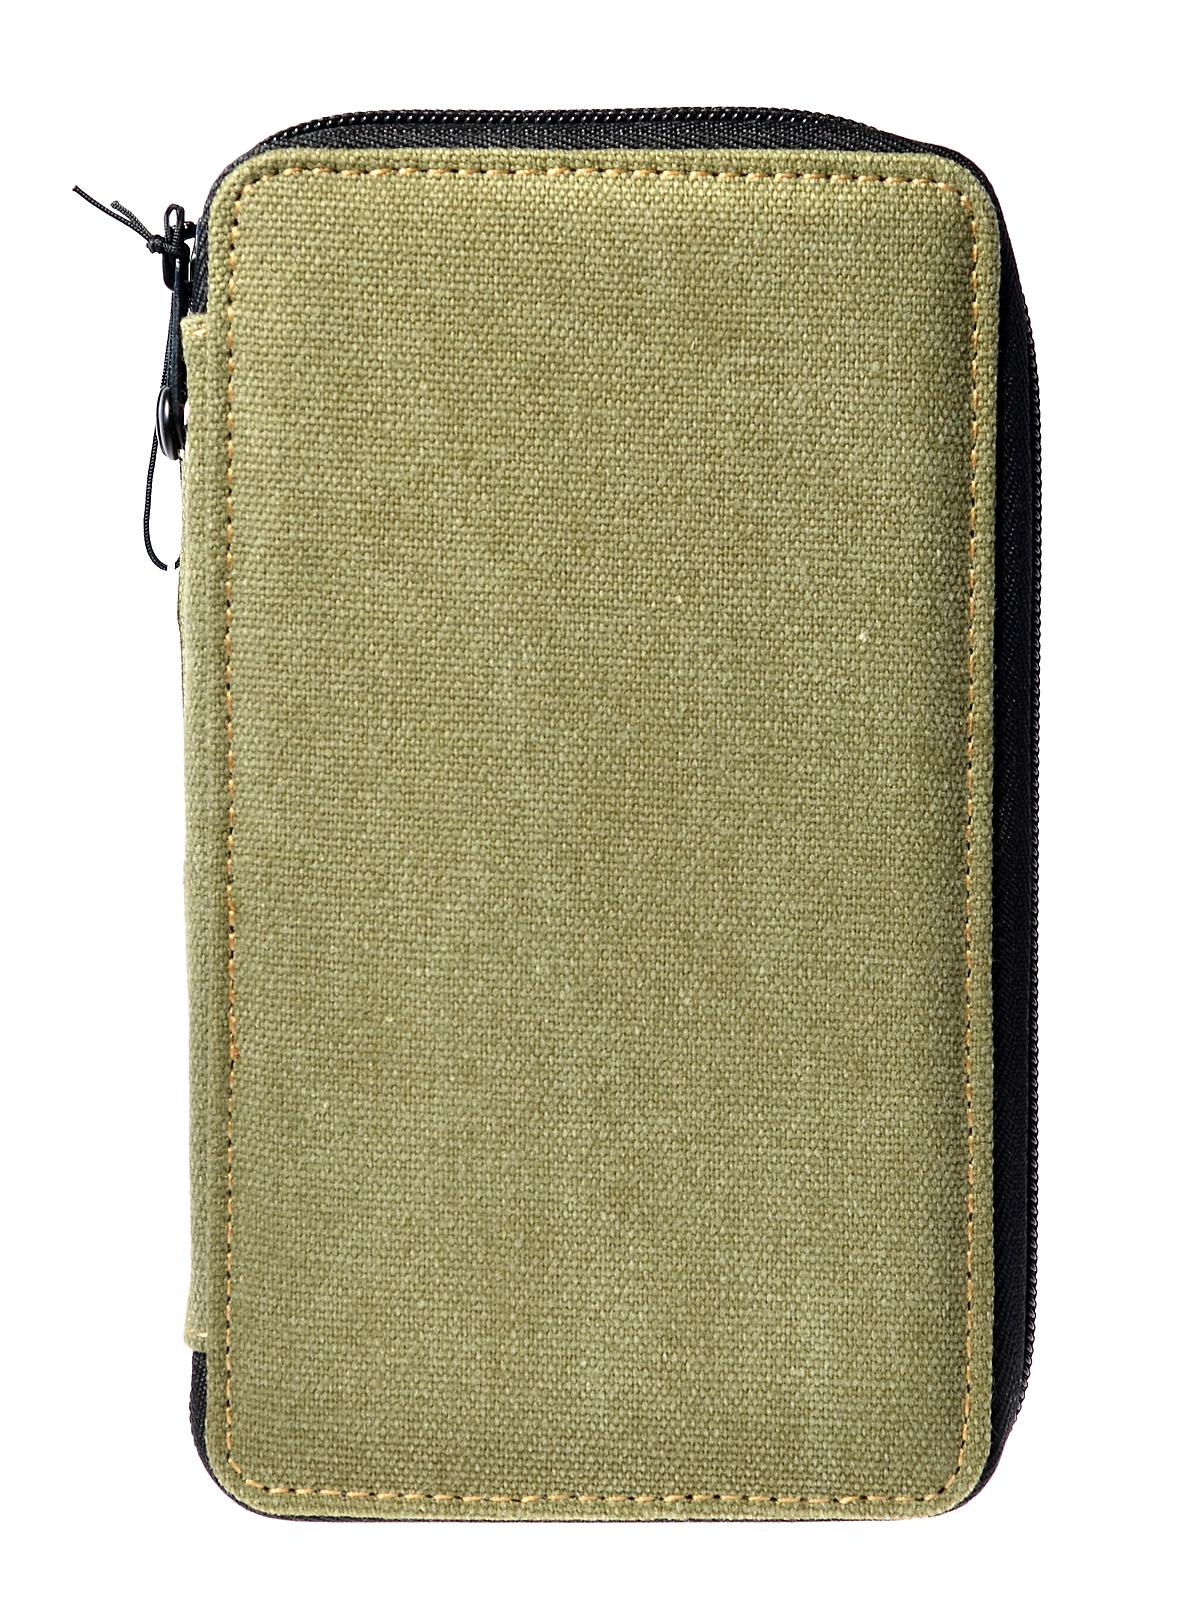 Canvas Pencil Cases Olive Holds 48 Pencils